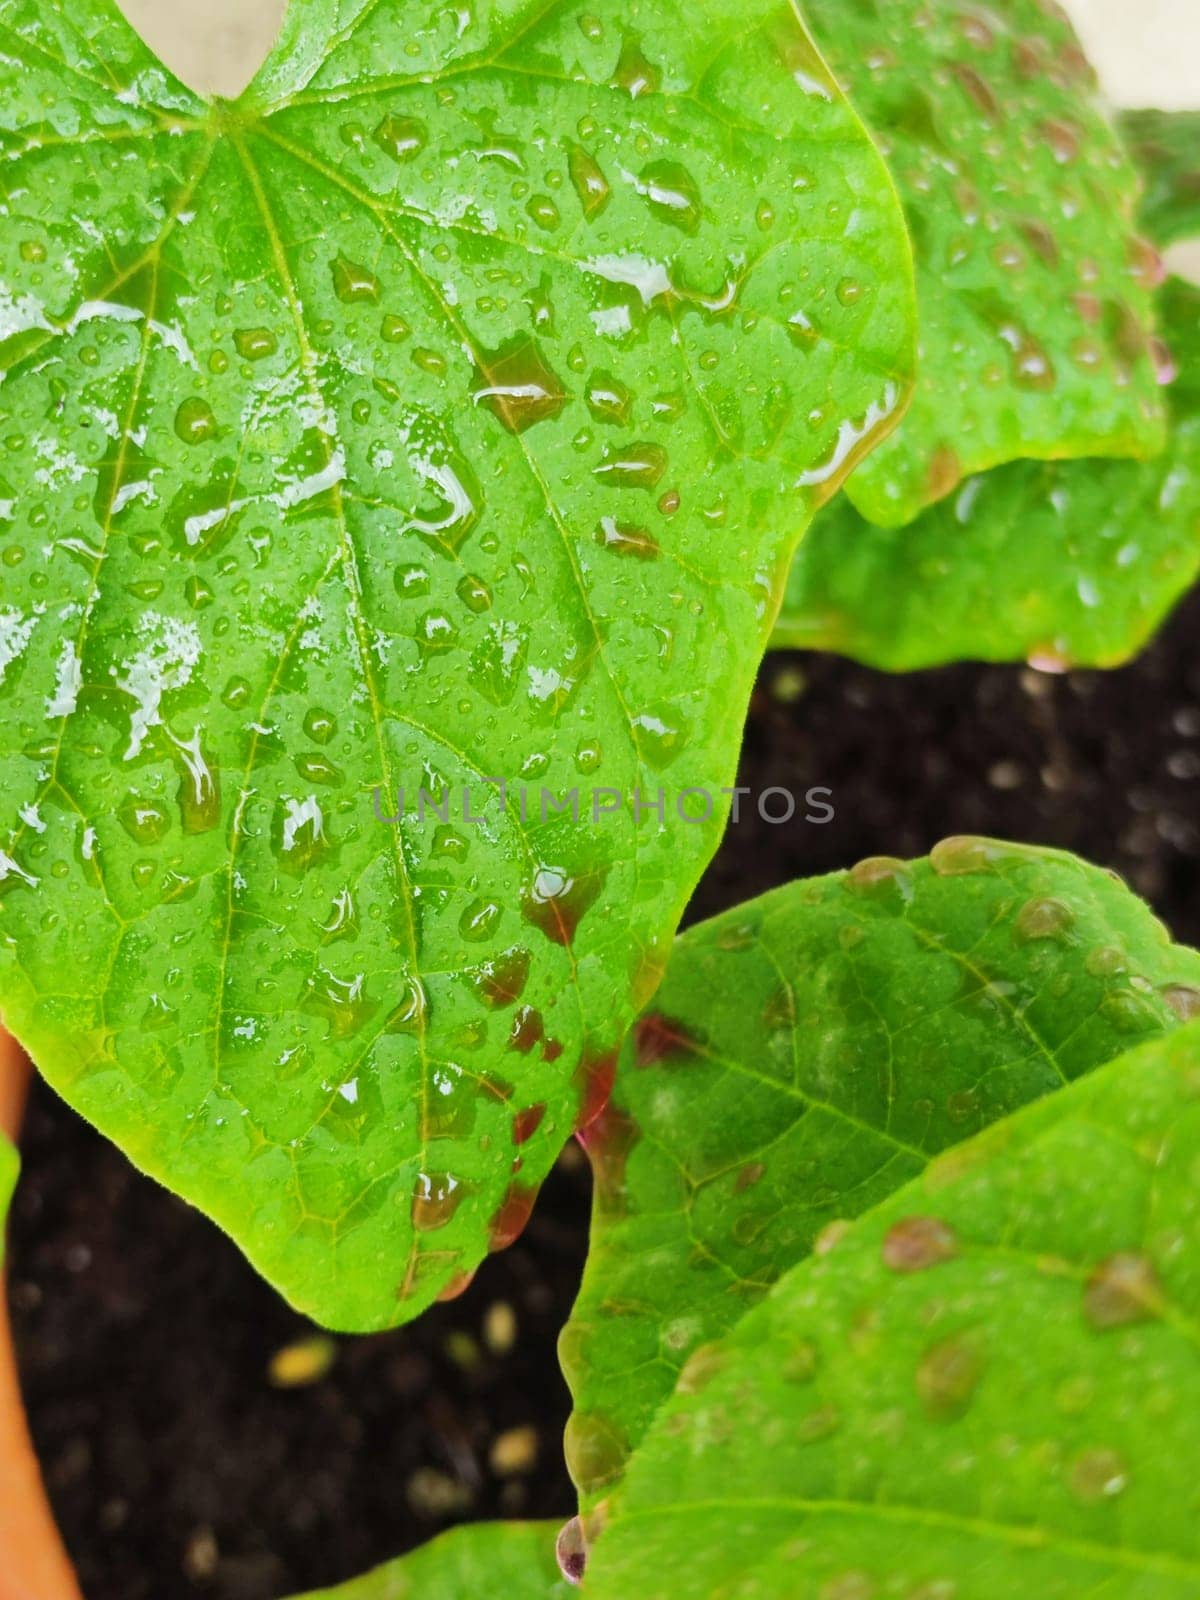 solution of potassium permanganate on cucumber leaves close-up, prevention and treatment of fungal diseases of cucumber seedlings.